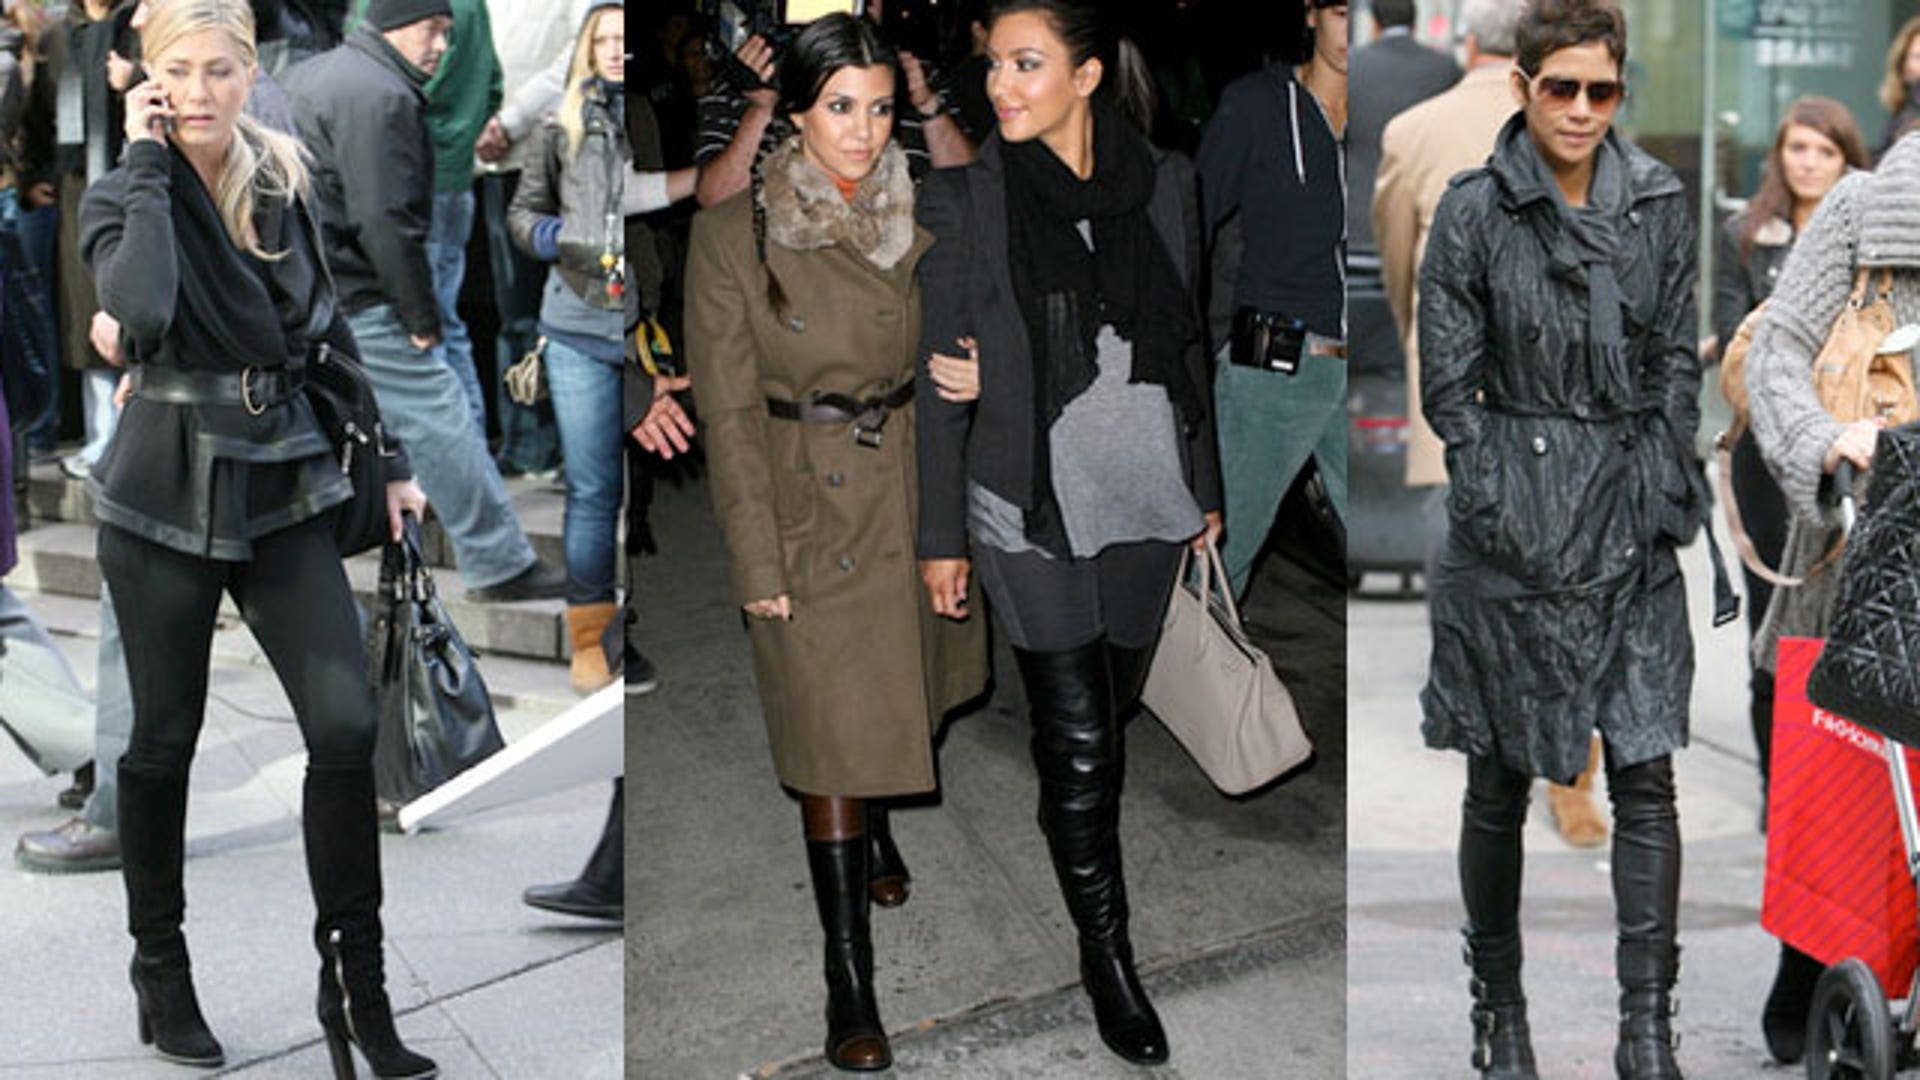 How To Style Knee High Boots For Any Occasion